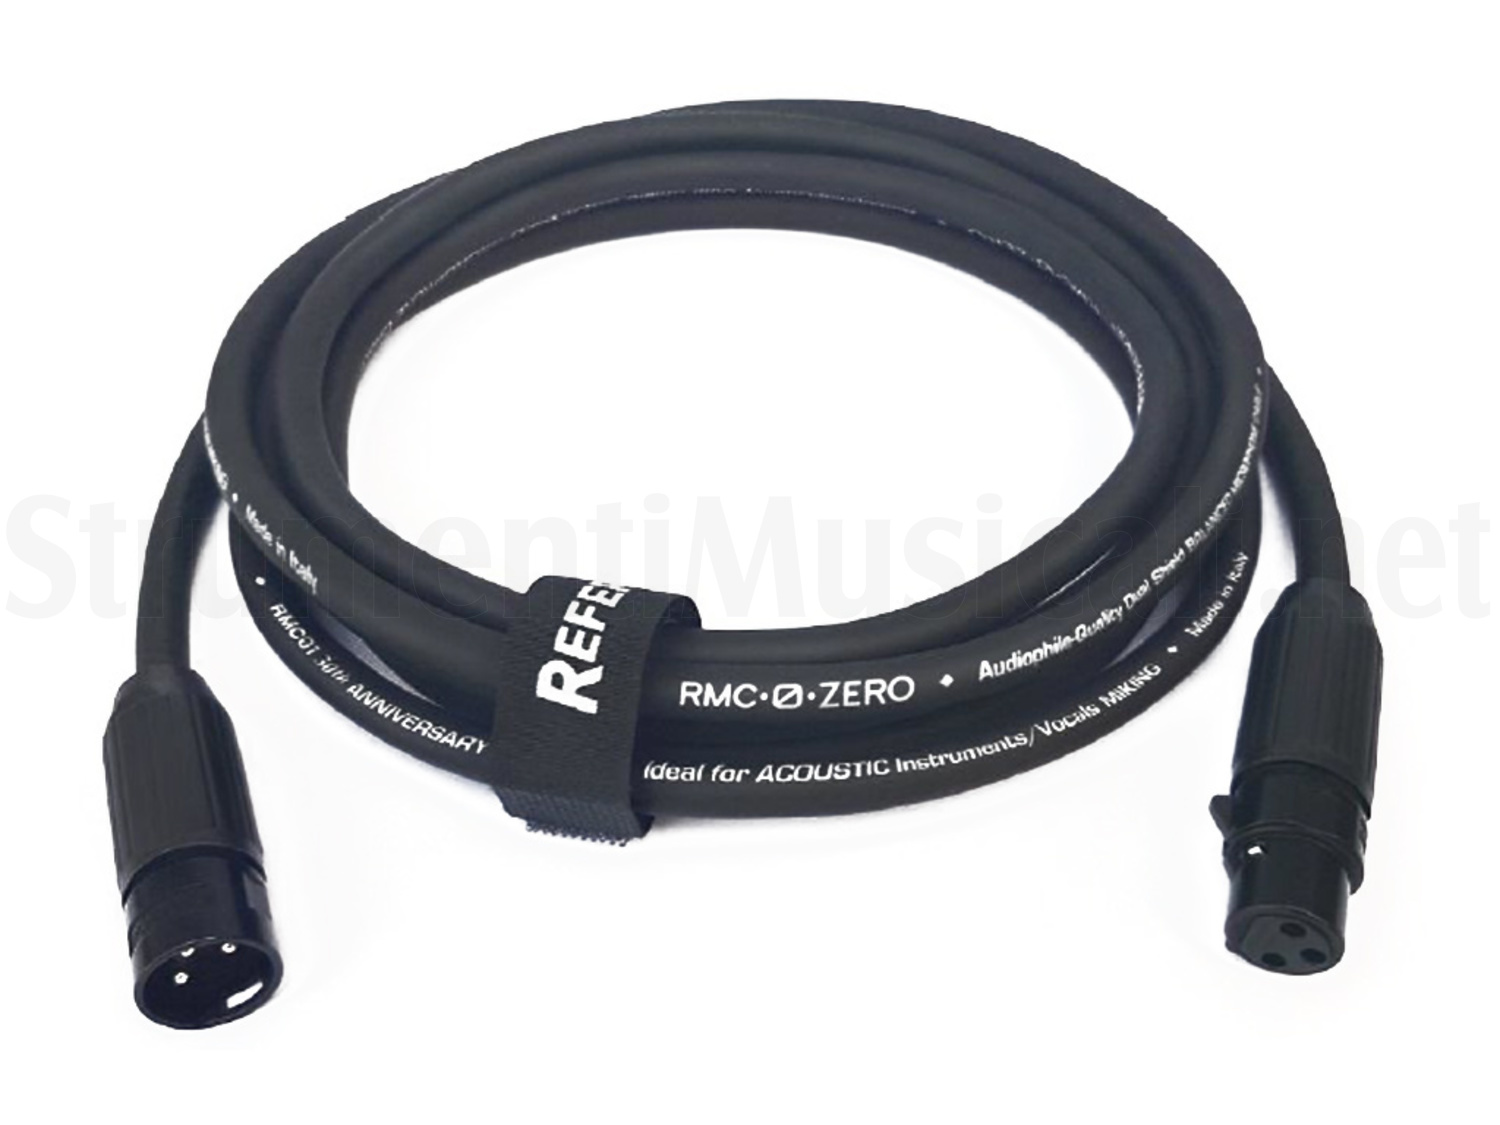 B品セール Reference Cables RMC-S01 マイクケーブル 黒 XLRメス-XLRオス 7m 通販